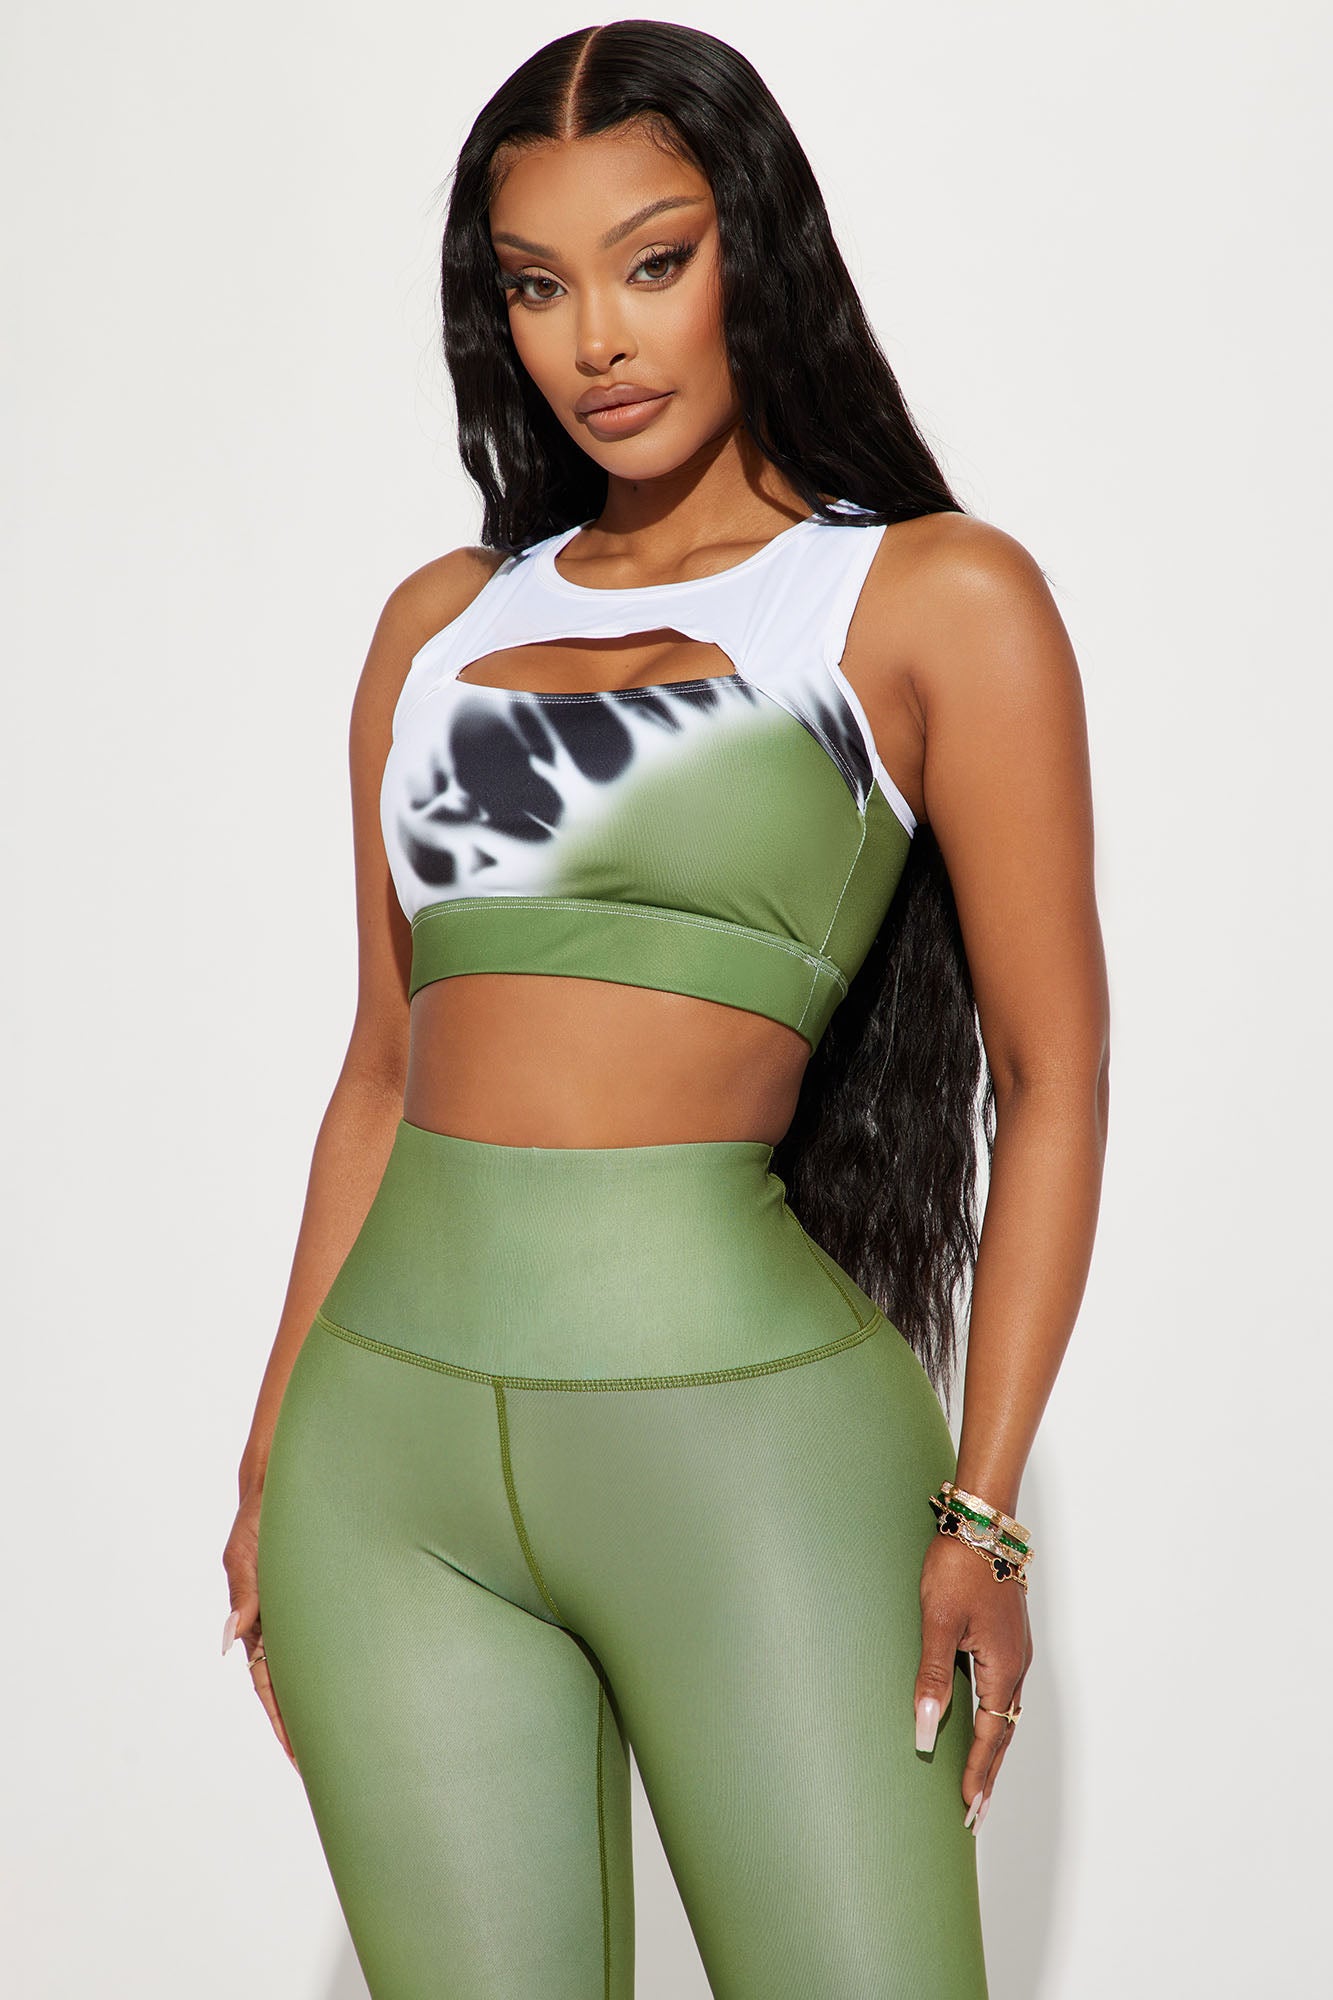 New Member Cut Out Sports Bra - Olive/combo